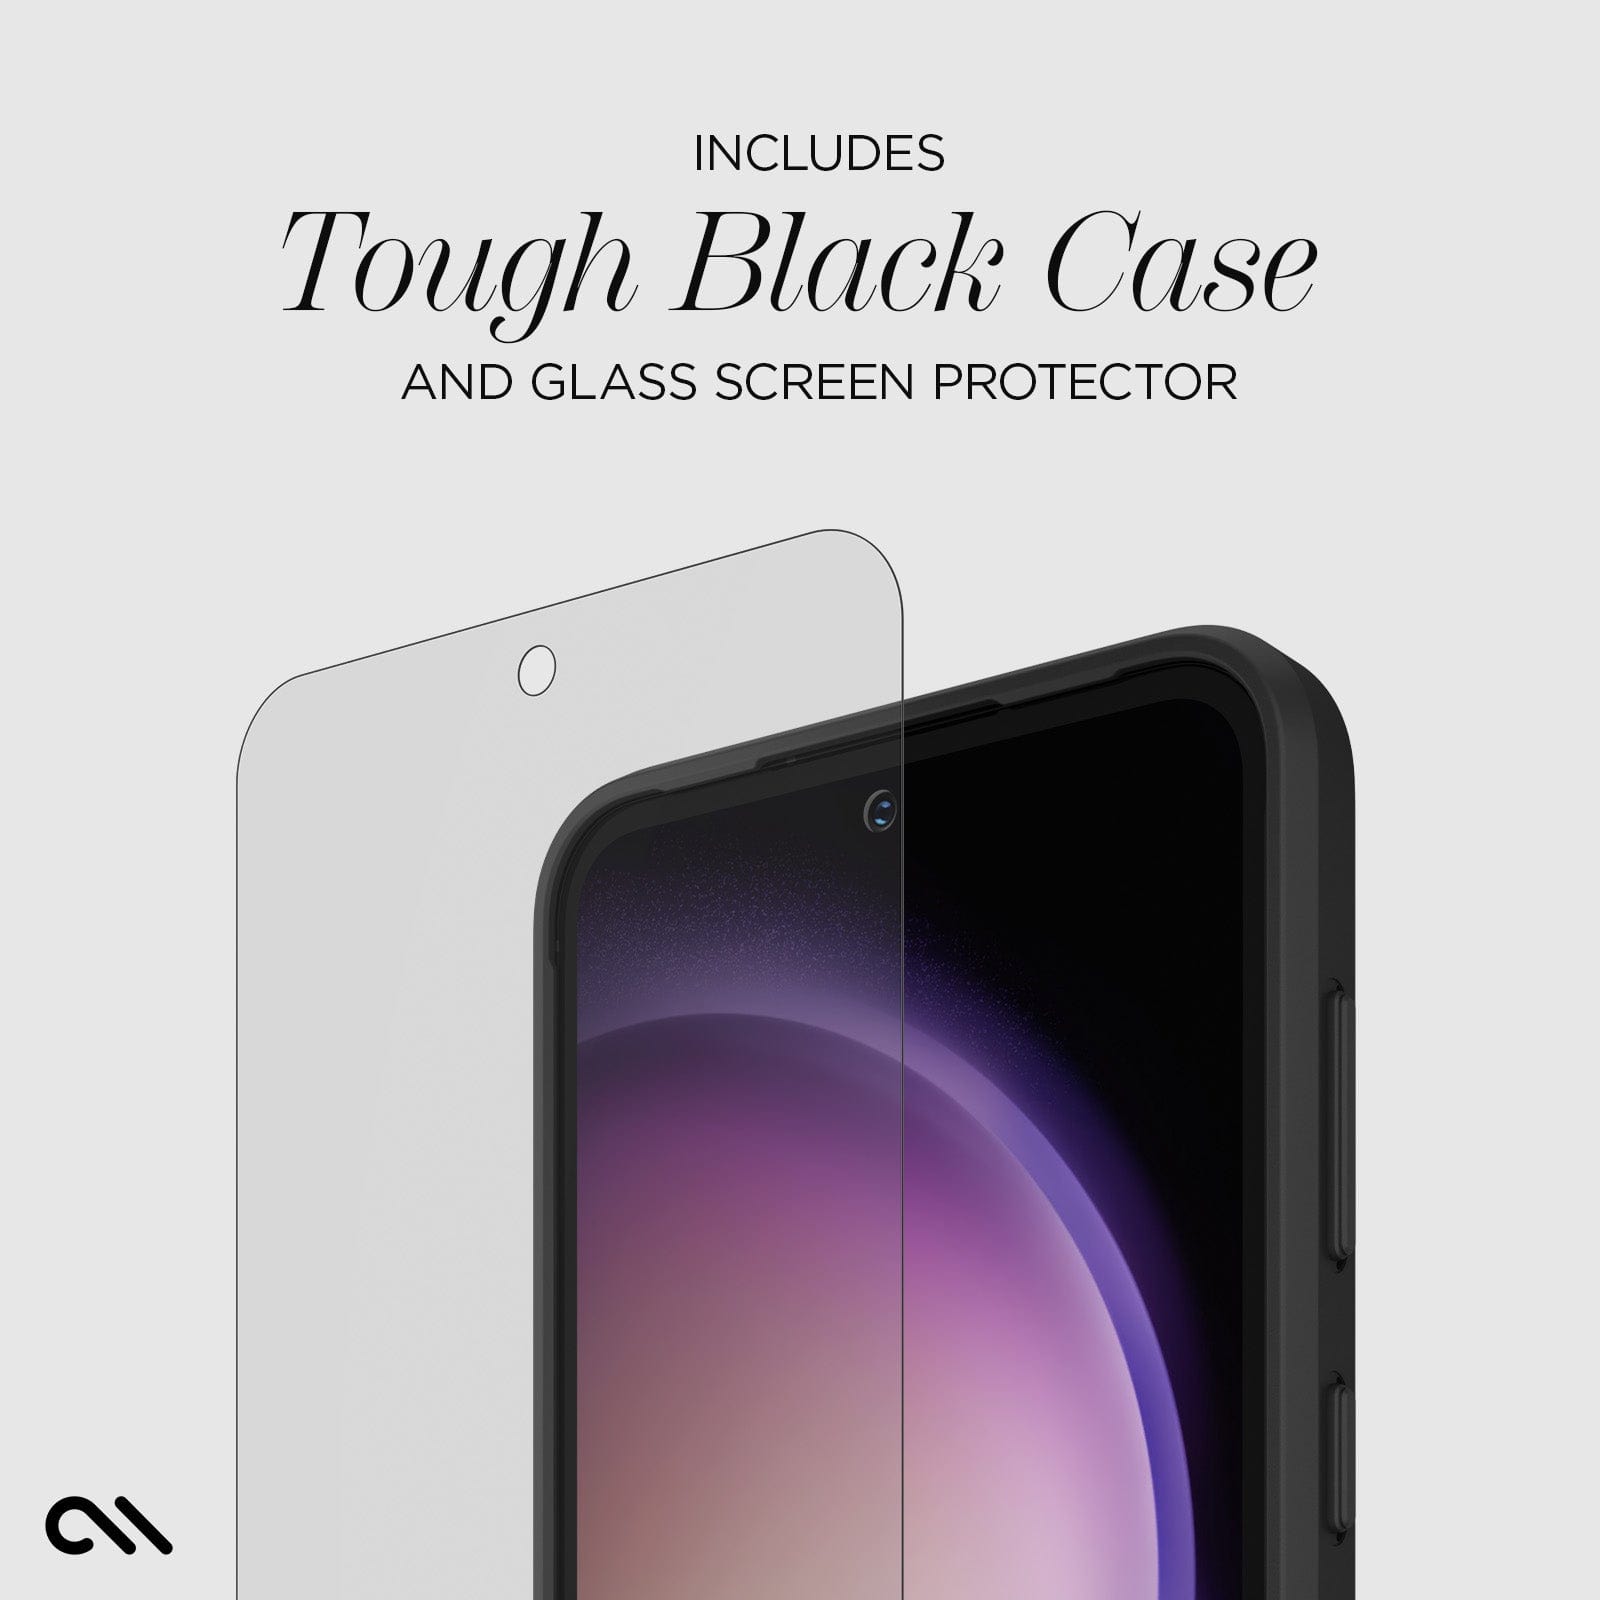 INCLUDES TOUGH BLACK CASE AND GLASS SCREEN PROTECTOR